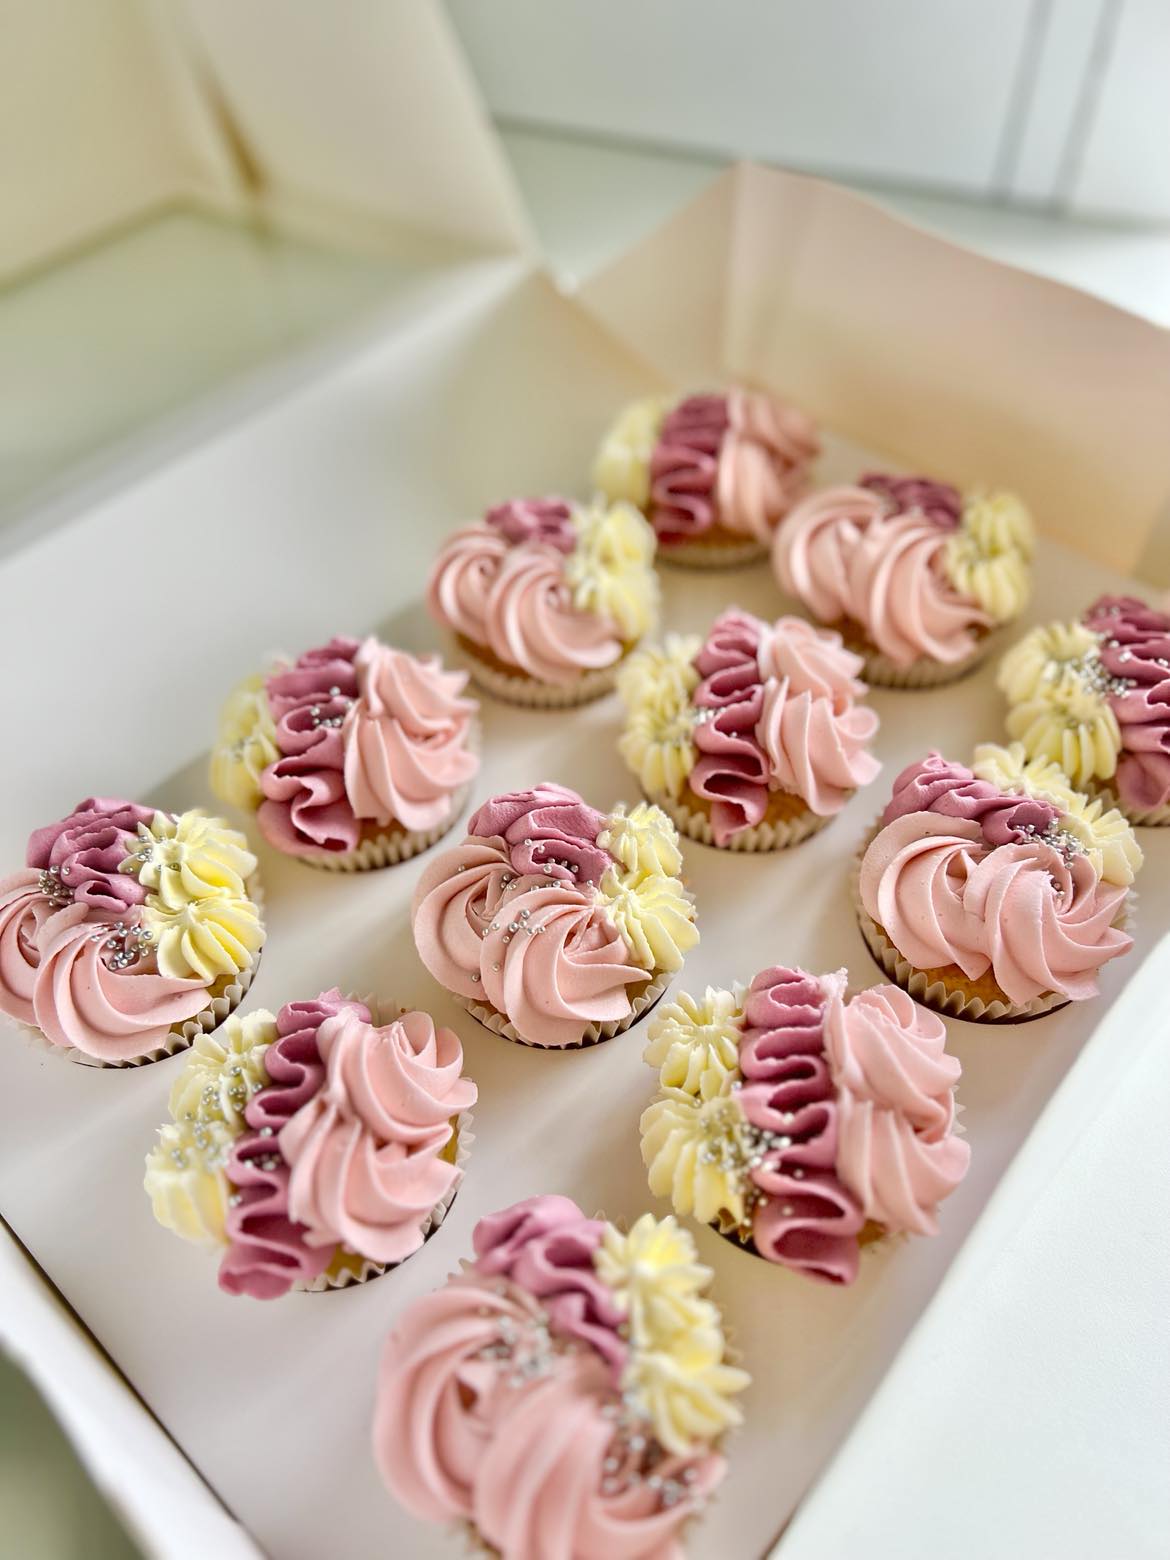 Buttercream and bubbles - Saturday 25th May, 1-2:30pm